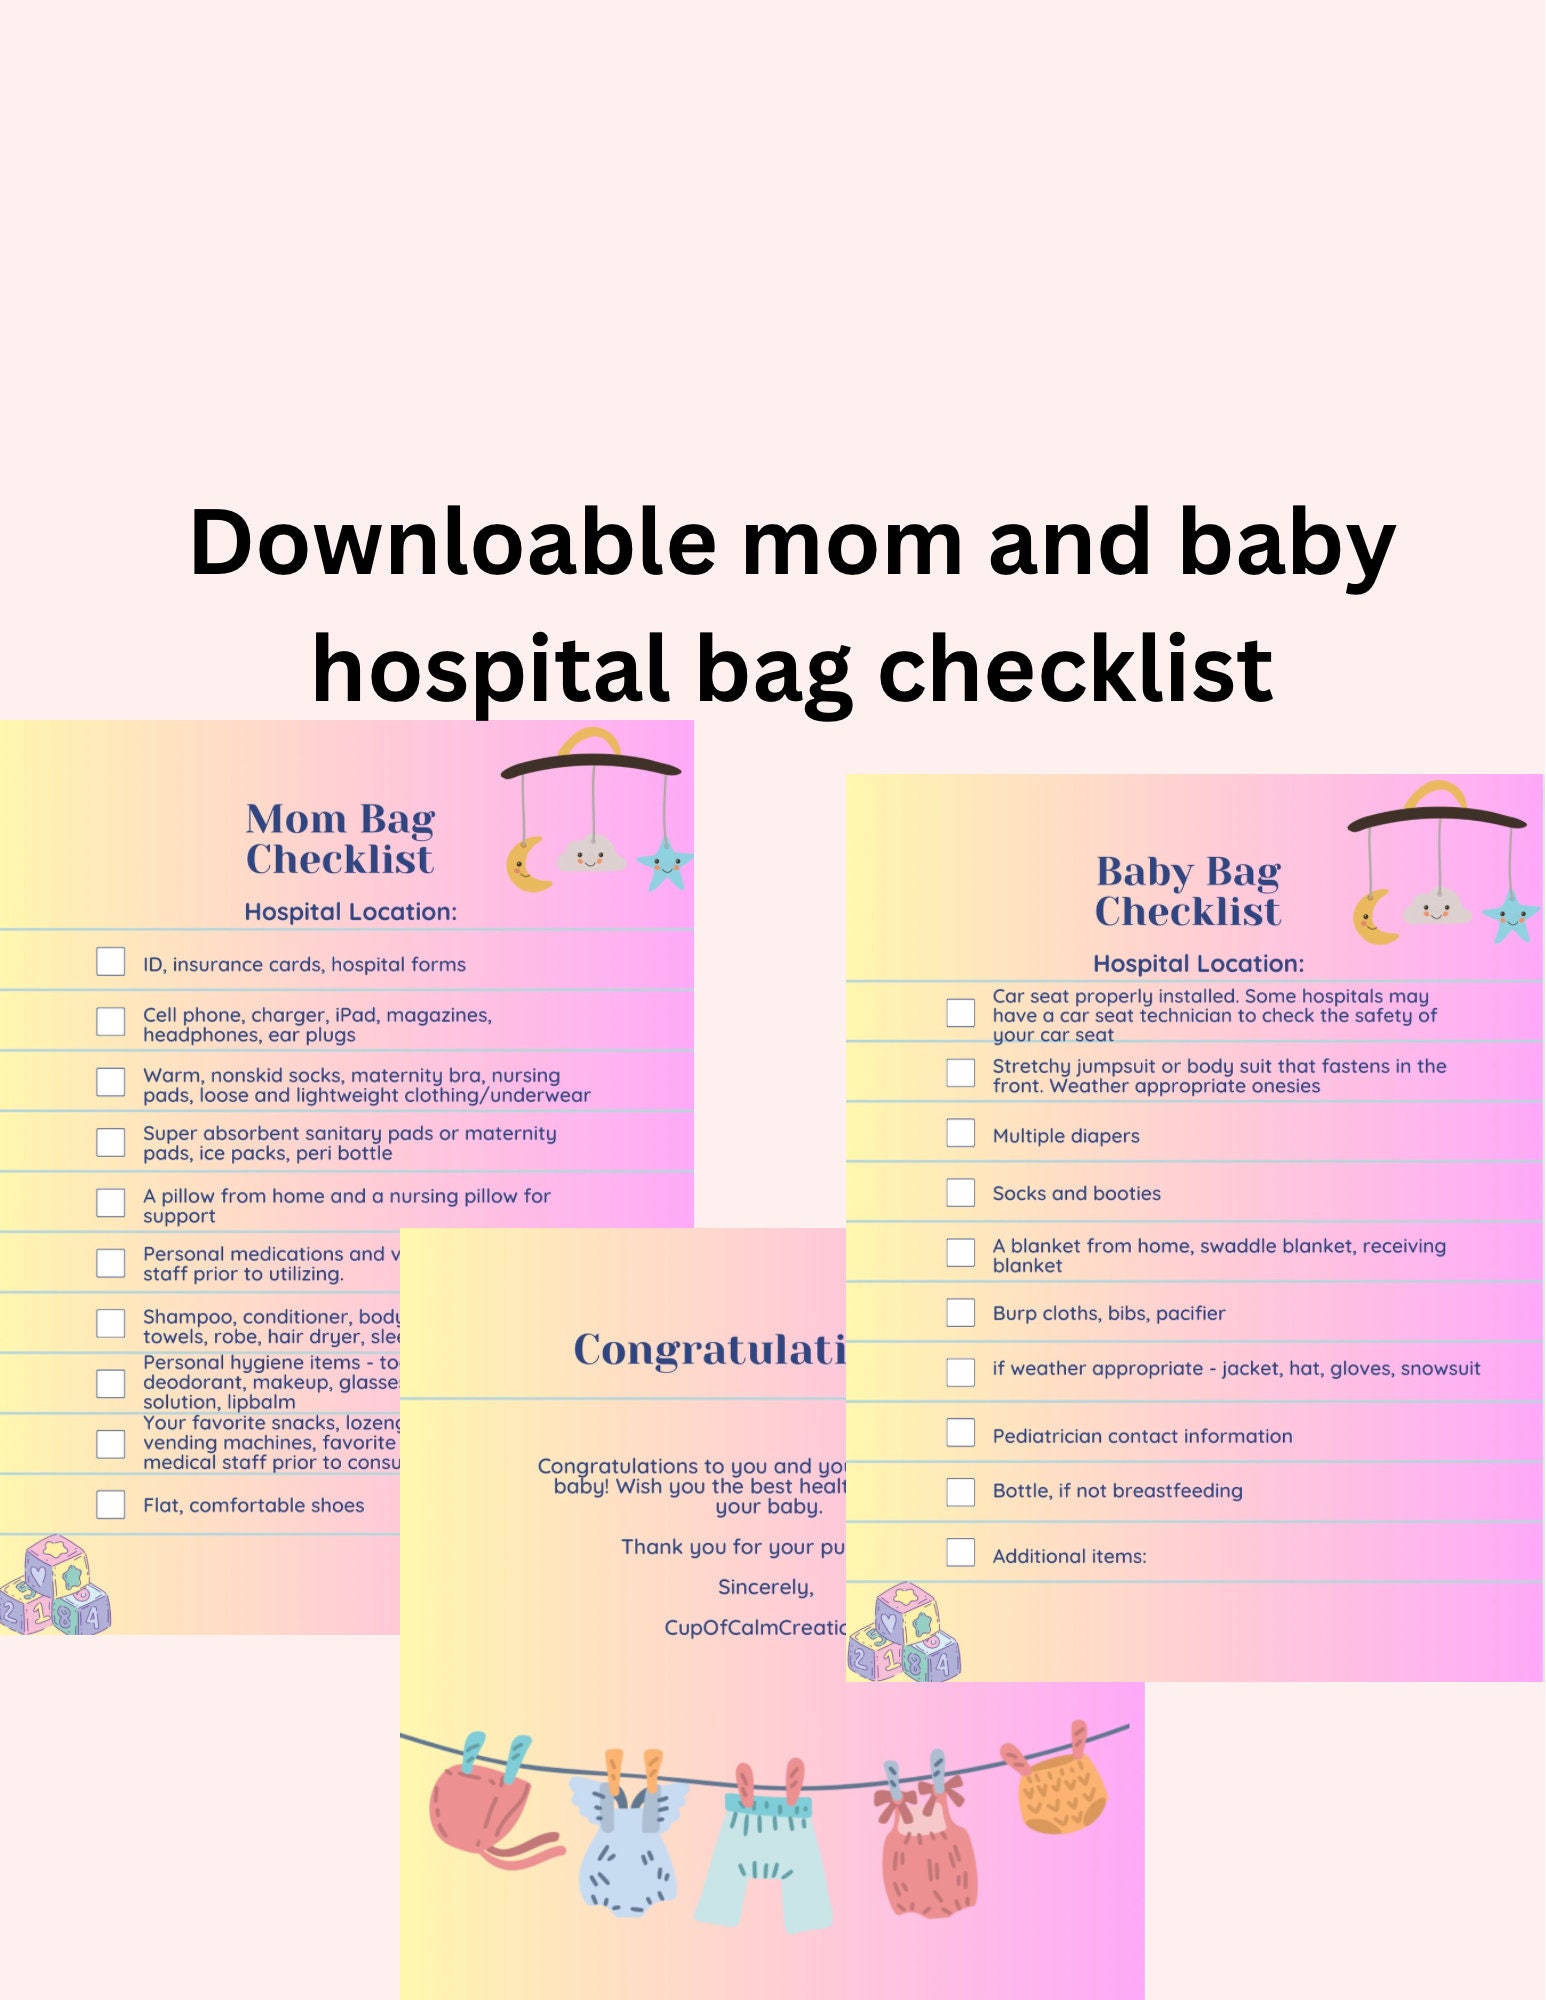 What I'm Packing in My Hospital Bag (for Baby #2) | The Mom Friend